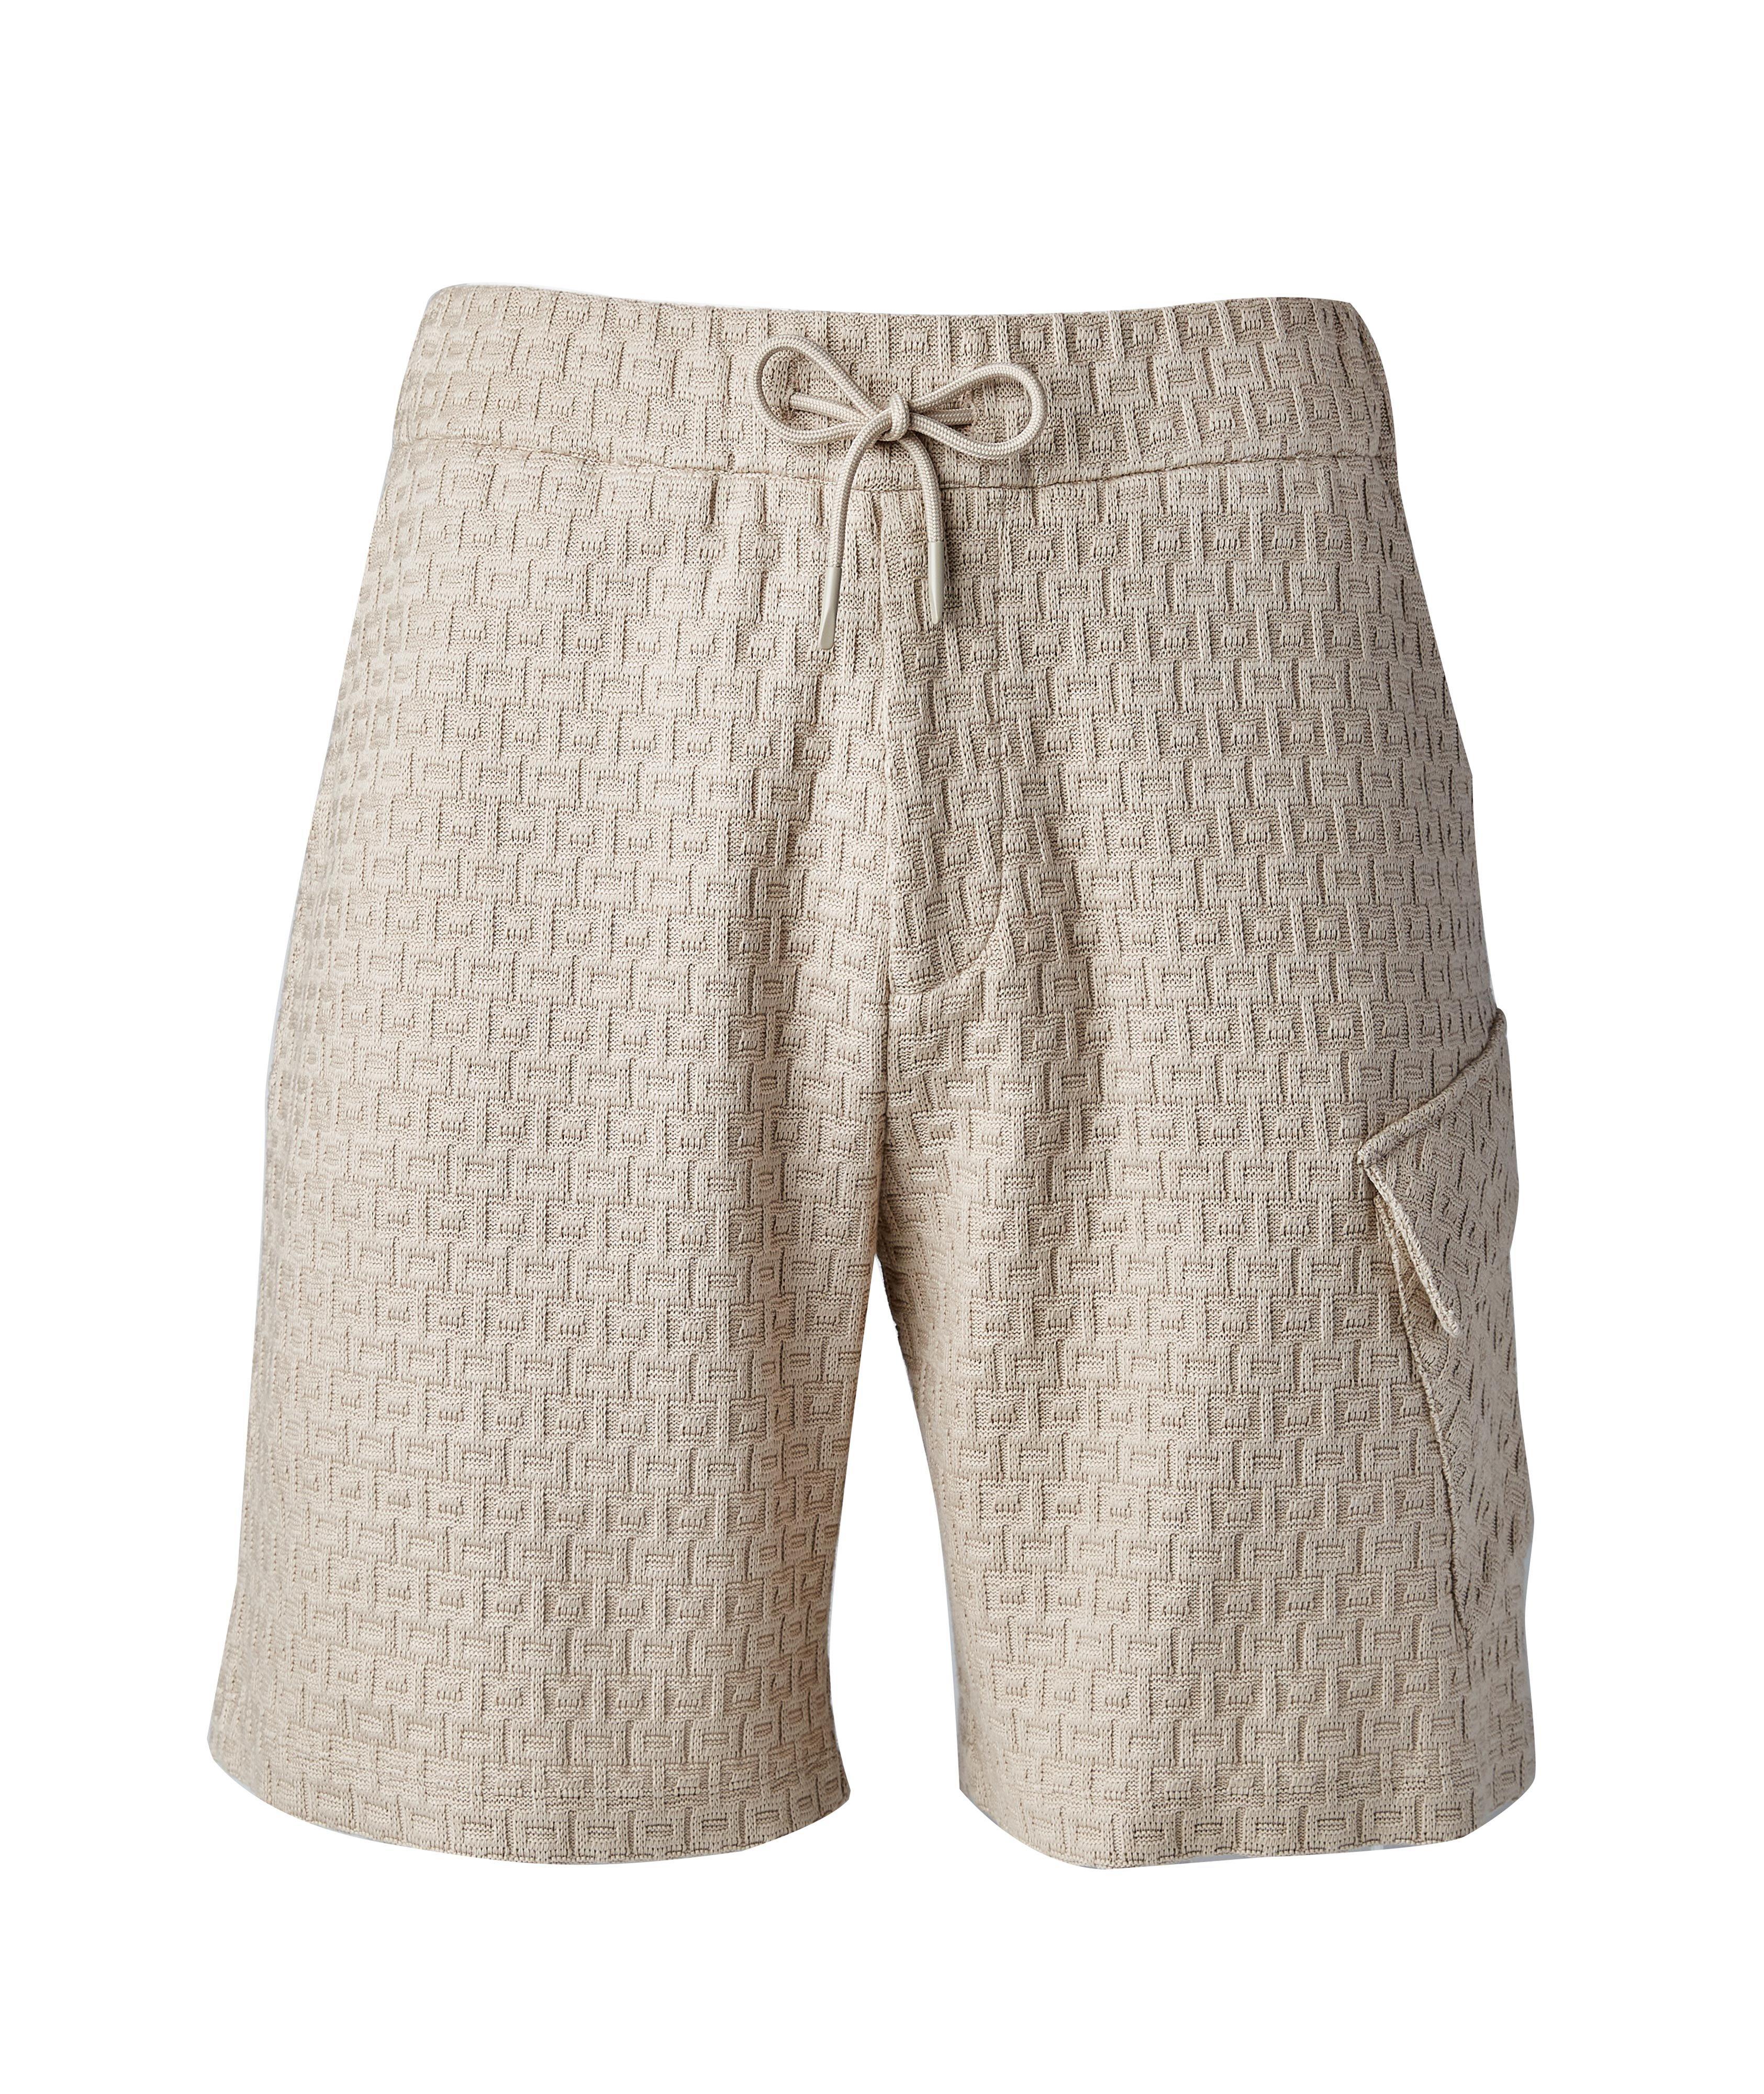 Textured Knit Cotton Shorts image 0